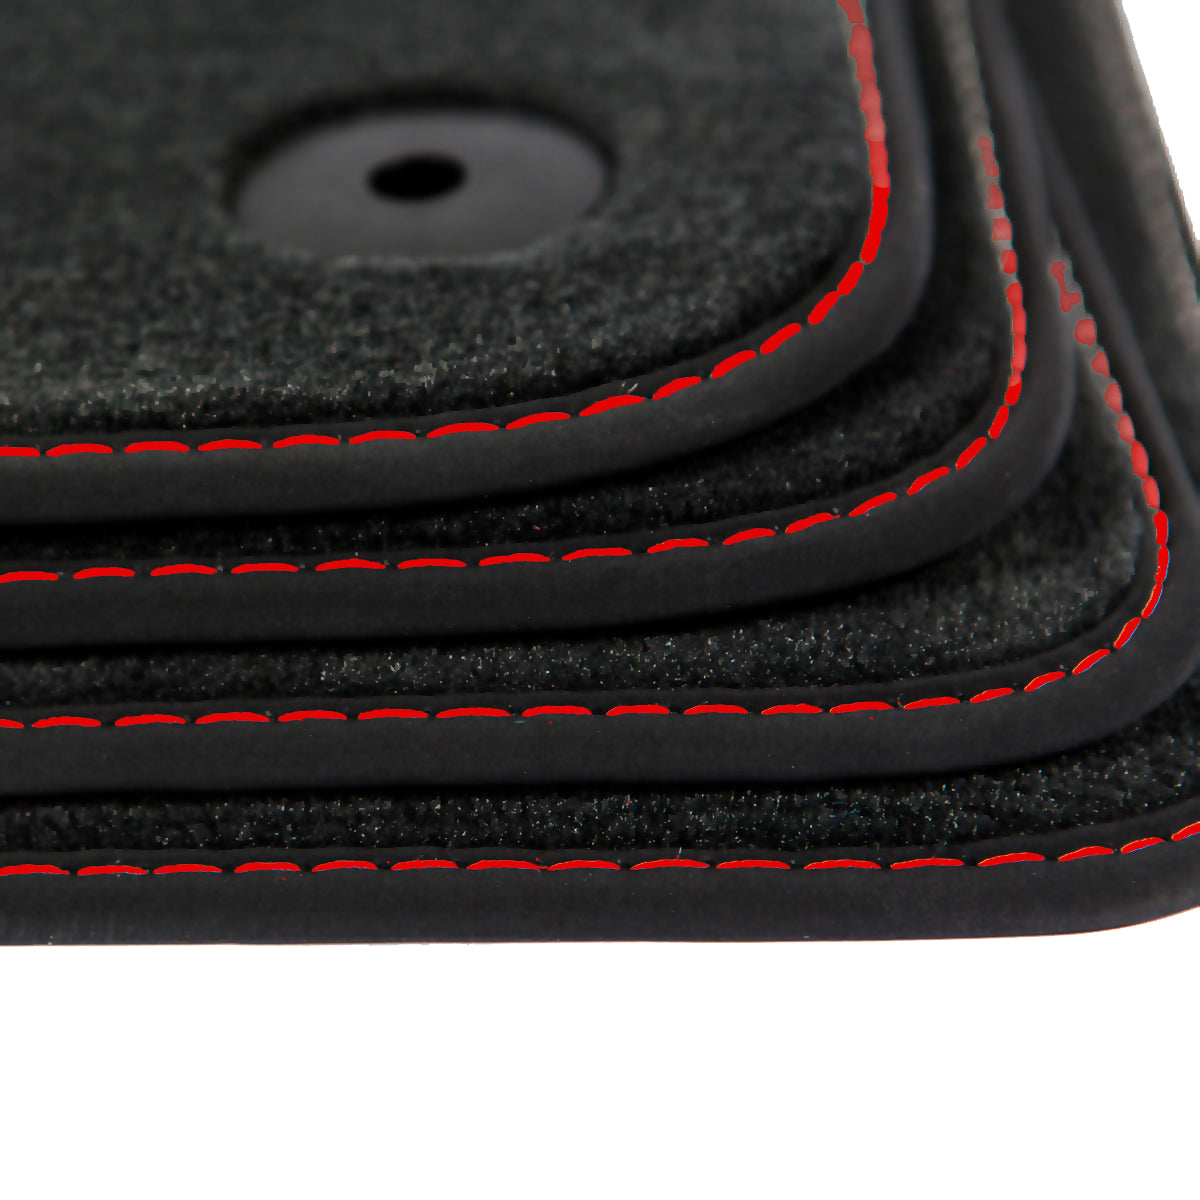 Audi TT Floor Mats - Coupe, Convertible 8S - Red Stitching